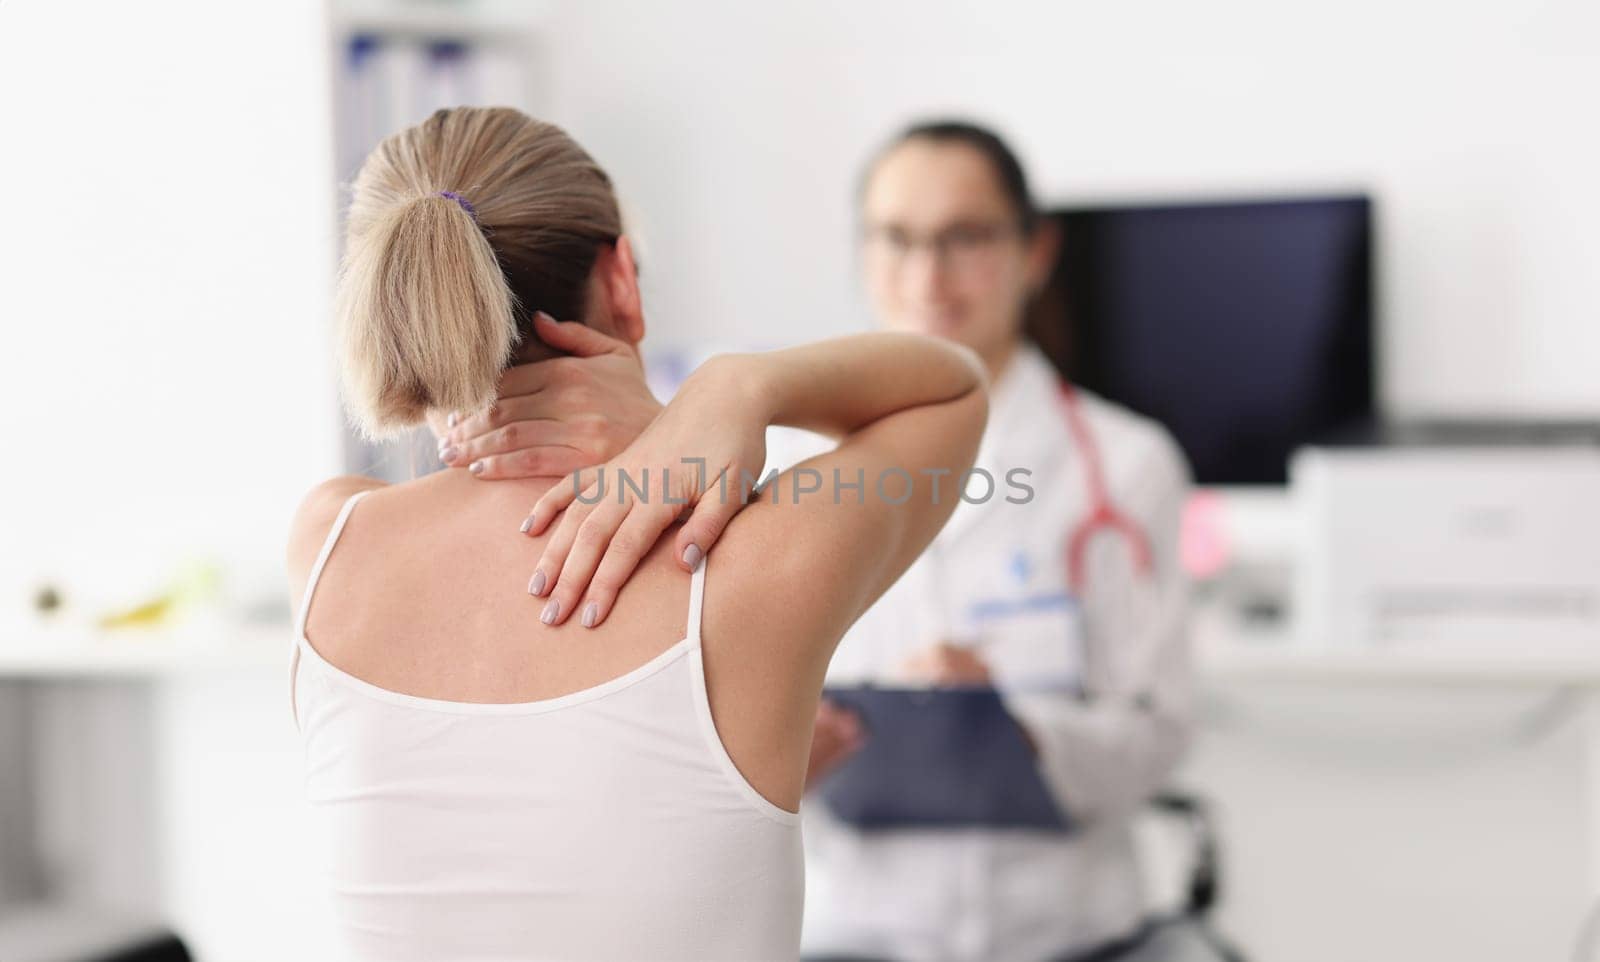 Patient with back pain problems at doctor appointment by kuprevich